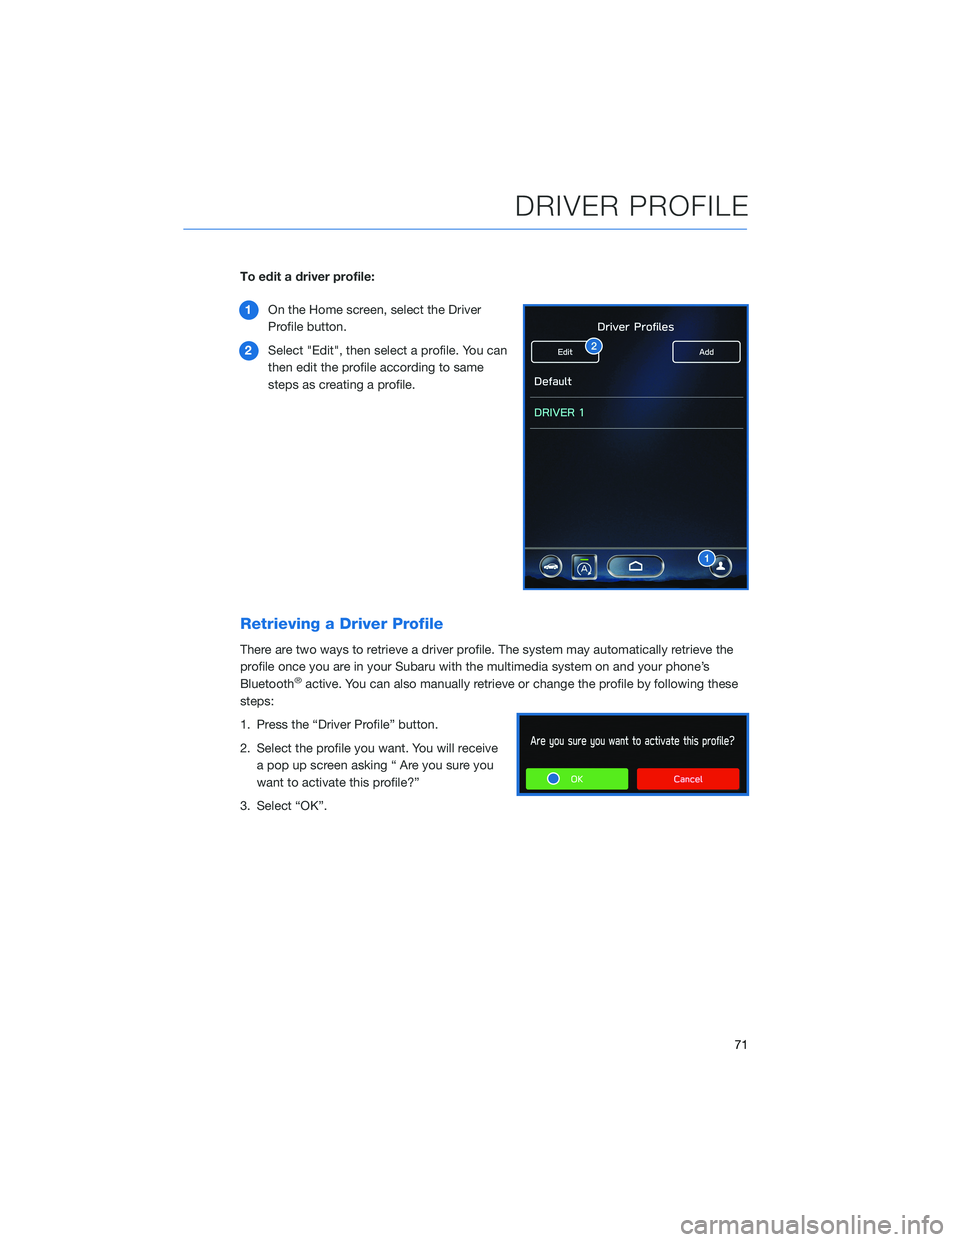 SUBARU LEGACY 2022  Getting Started Guide To edit a driver profile:
1On the Home screen, select the Driver
Profile button.
2Select "Edit", then select a profile. You can
then edit the profile according to same
steps as creating a prof